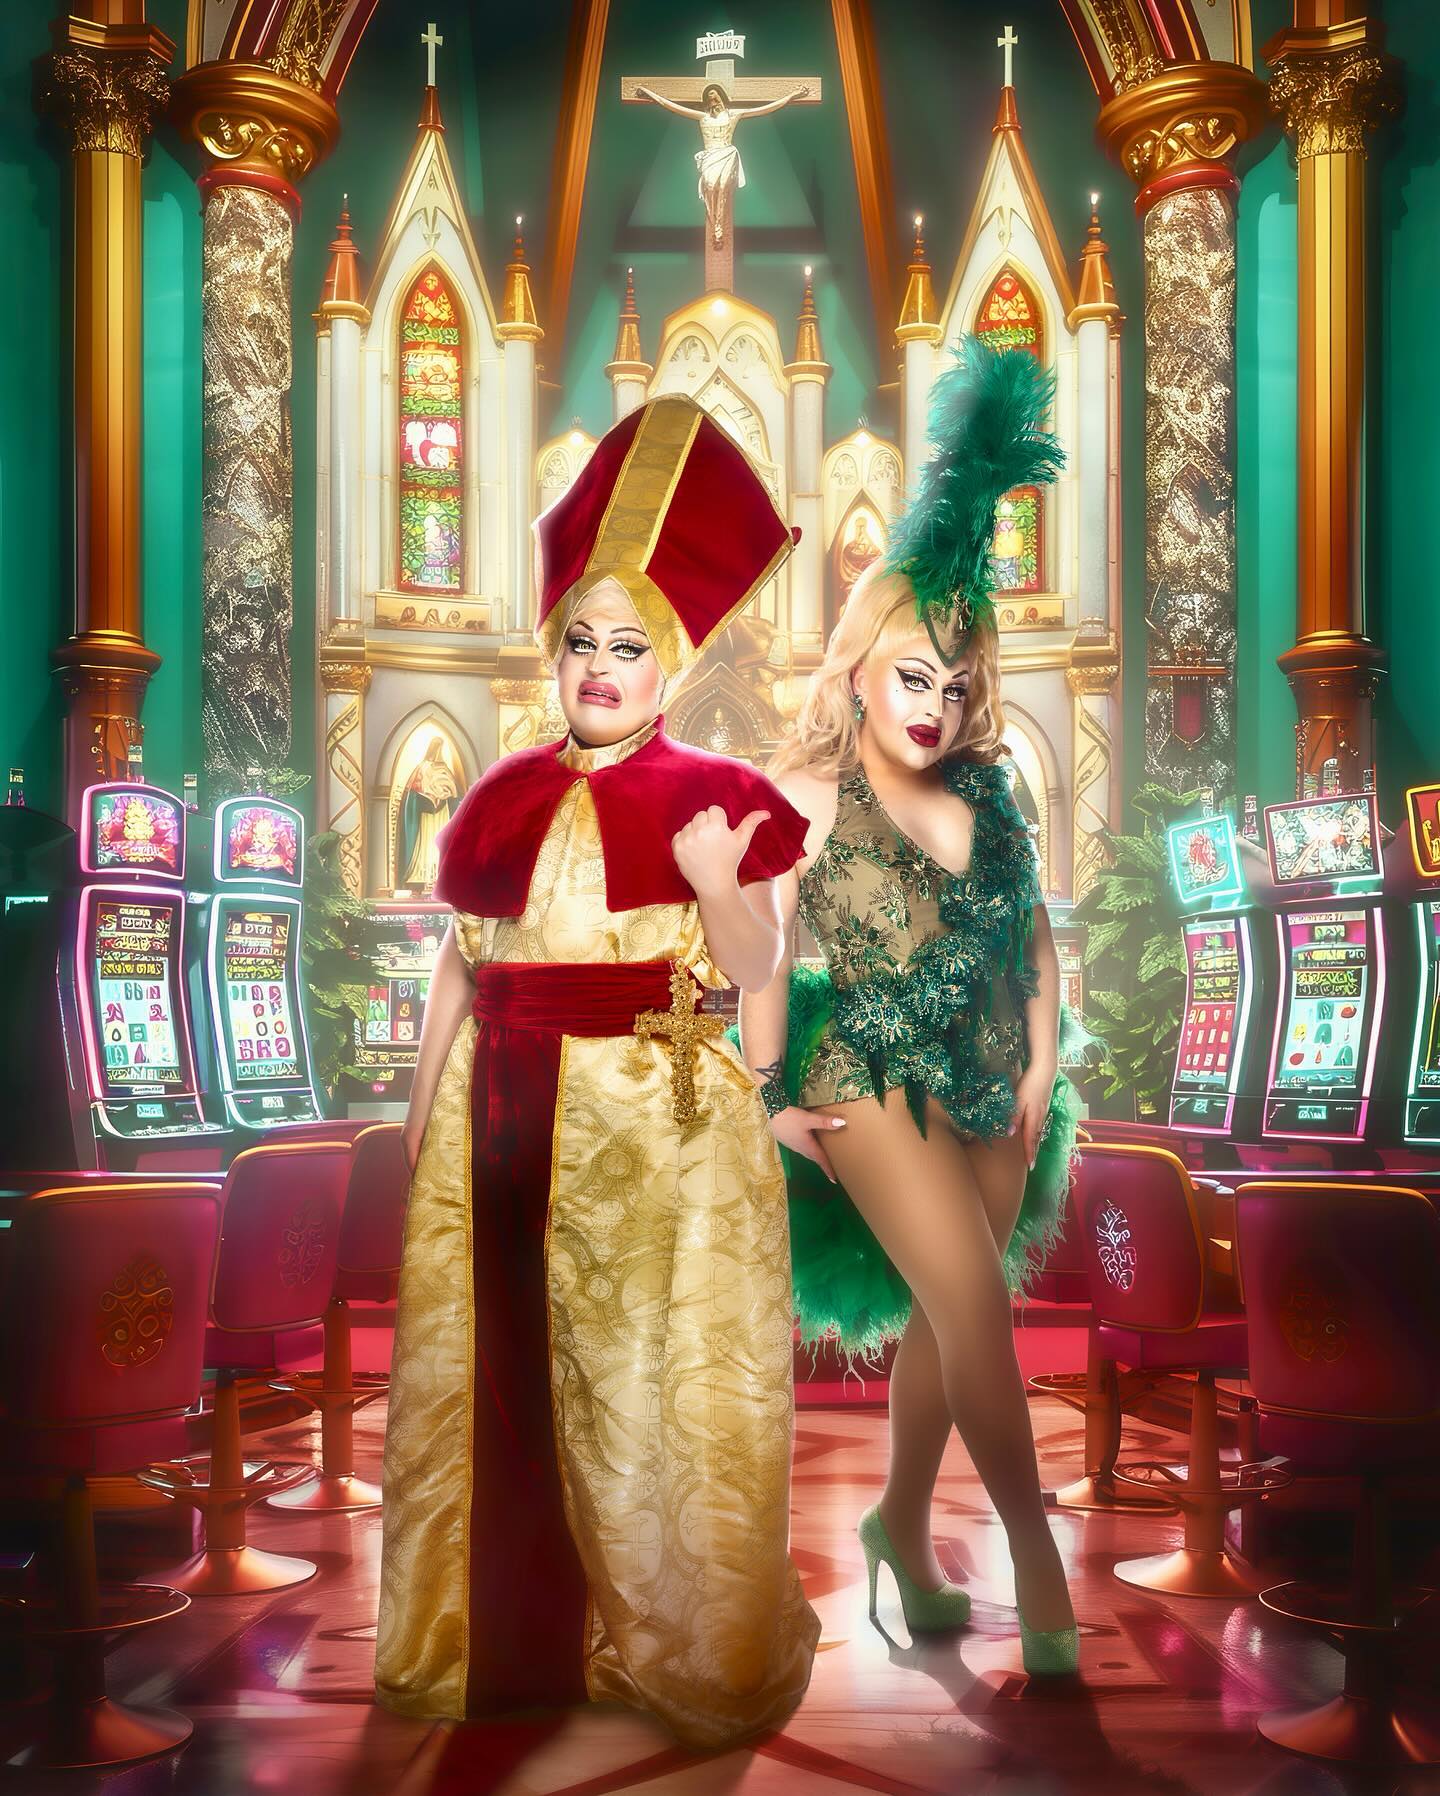 Two Hannahs - one in a gold and red palpal outfit and another in a green showgirl look, in a church with pokies.